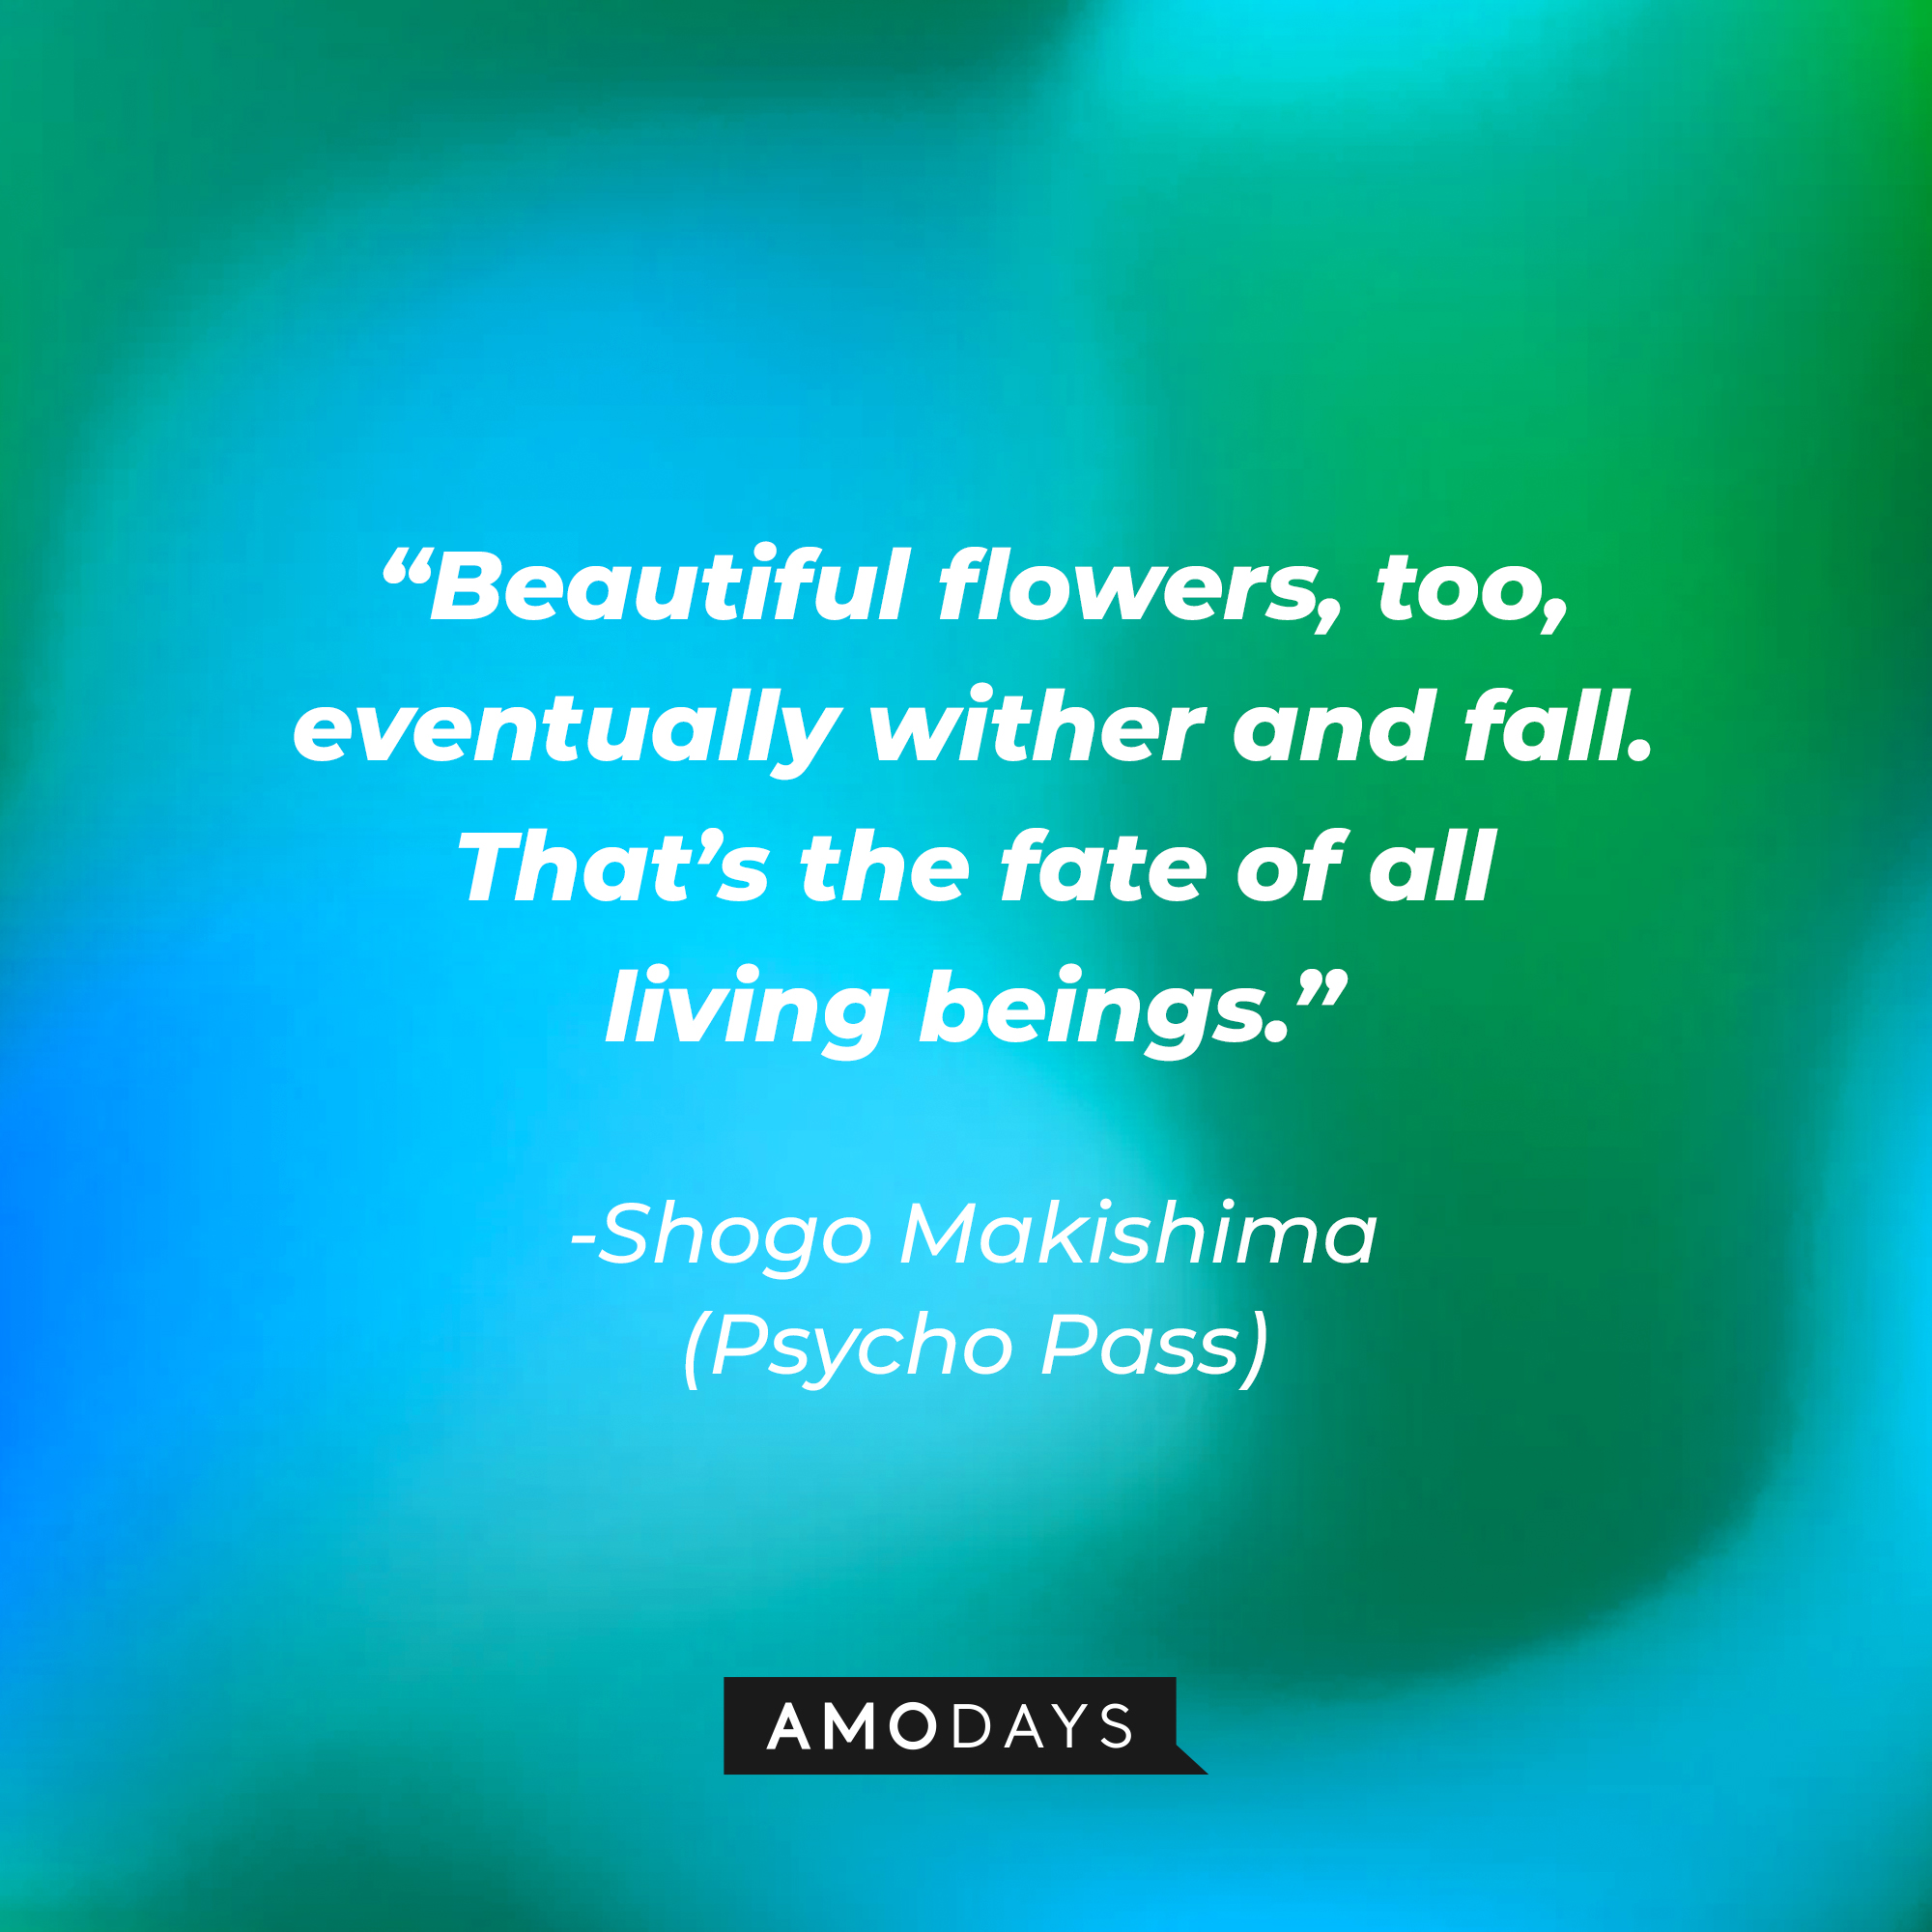 Shogo Makishima's quote: “Beautiful flowers, too, eventually wither and fall. That’s the fate of all living beings.” | Source: Amodays